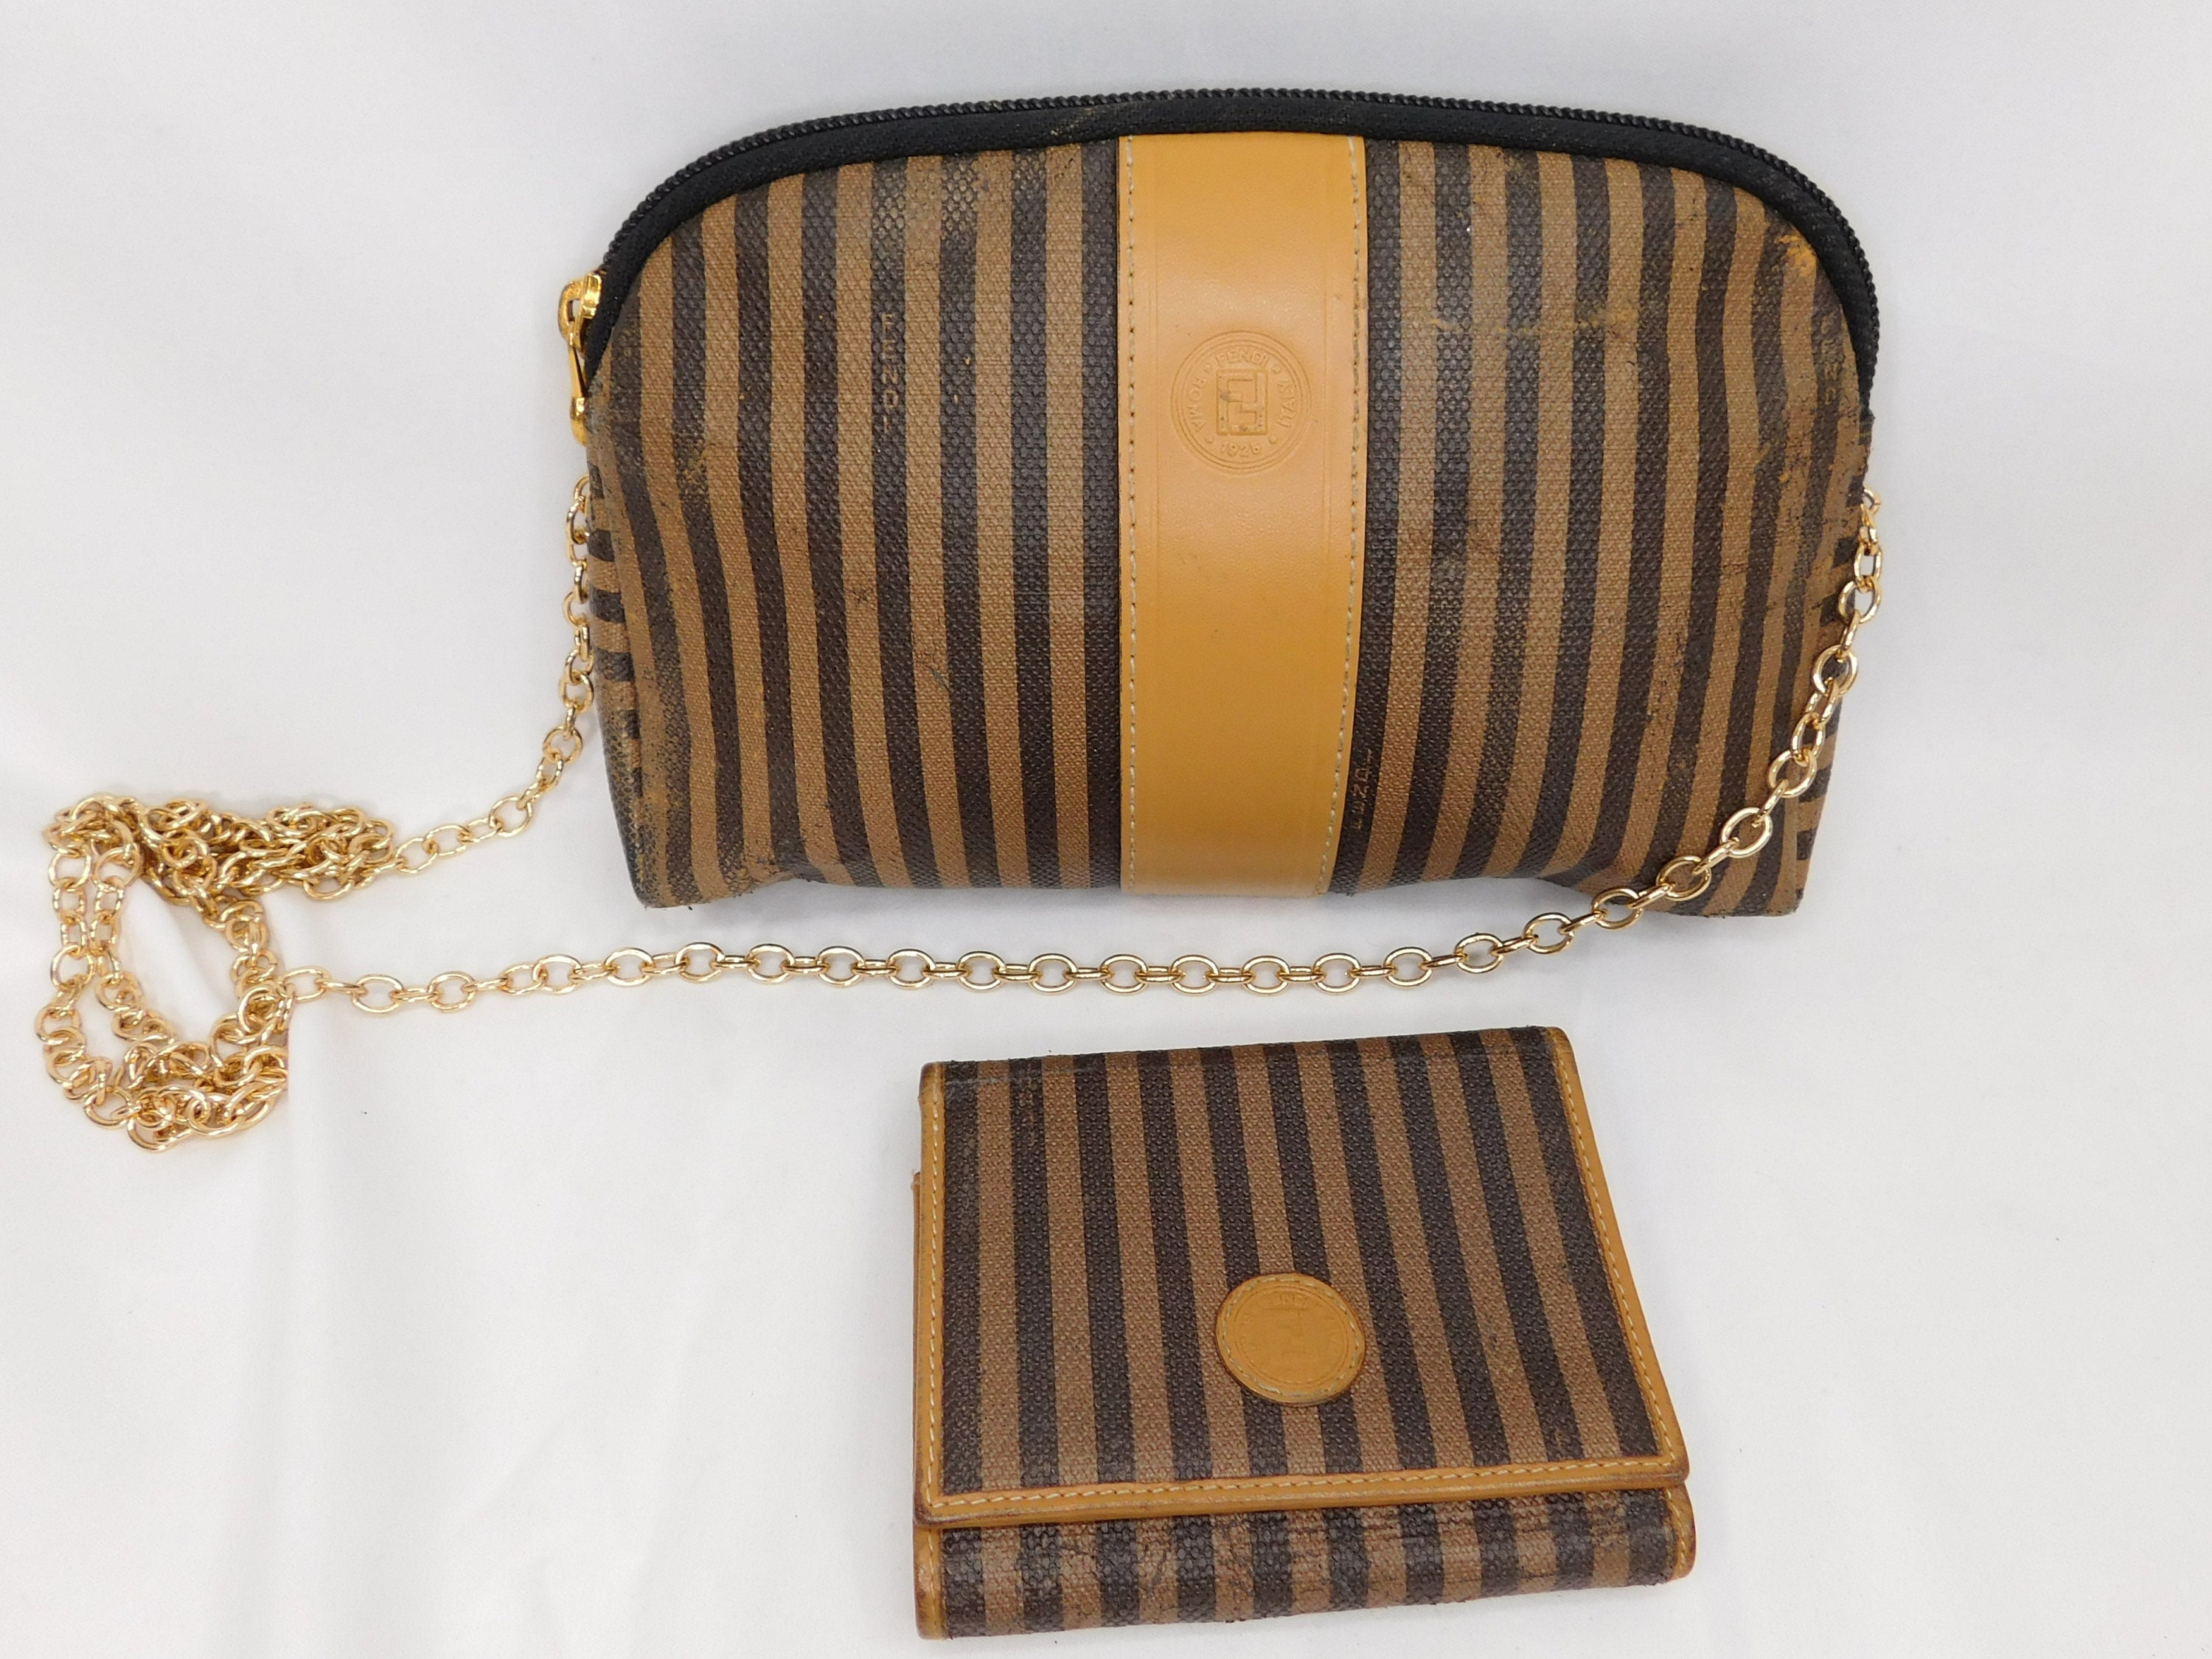 Vintage FENDI Pequin 1980s Crossbody Striped Leather and Coated